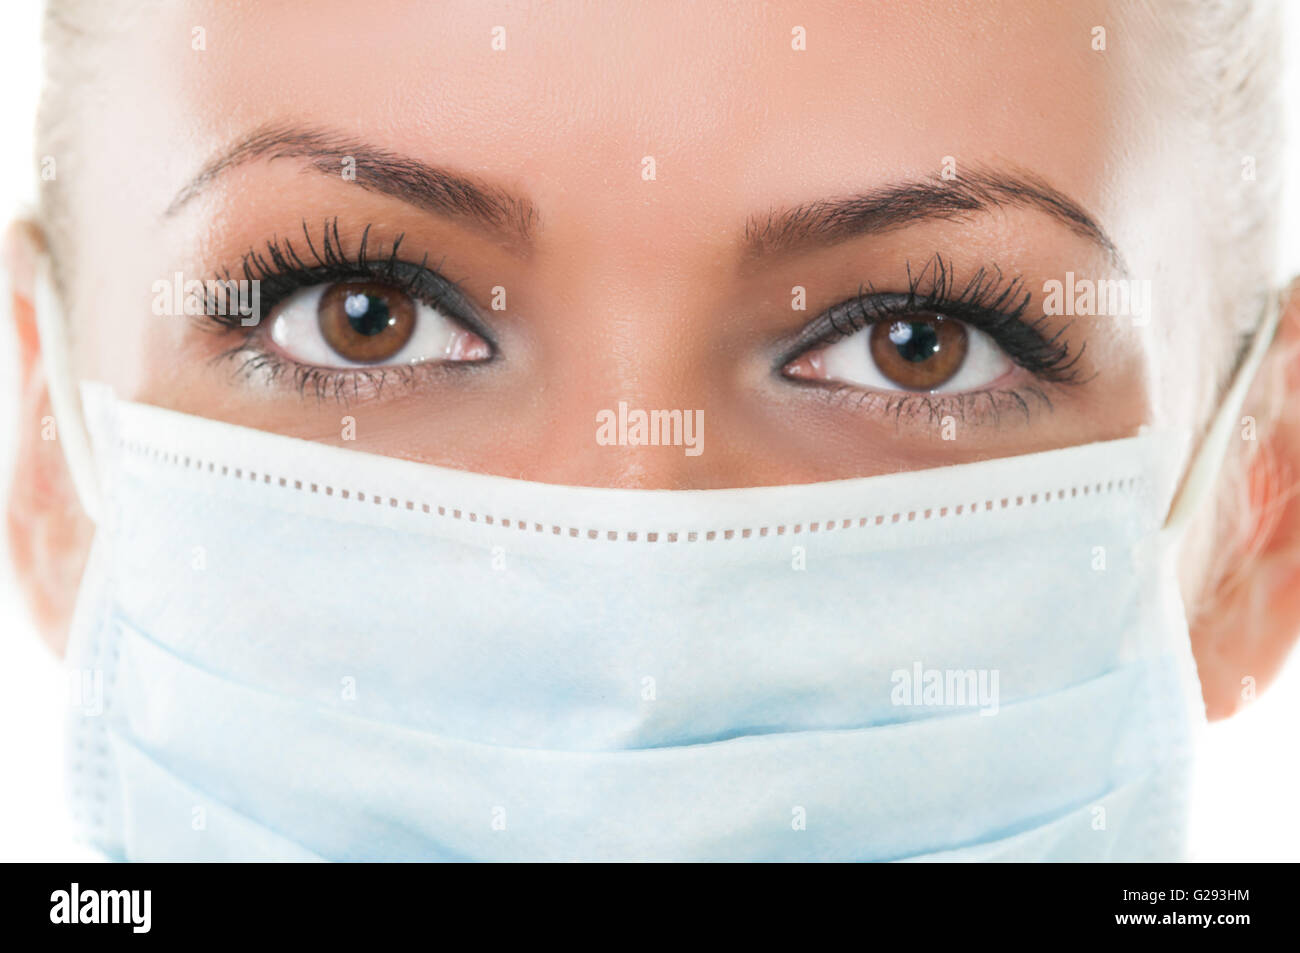 Closeup of the eyes of a dentist assistant wearing hospital  mask Stock Photo